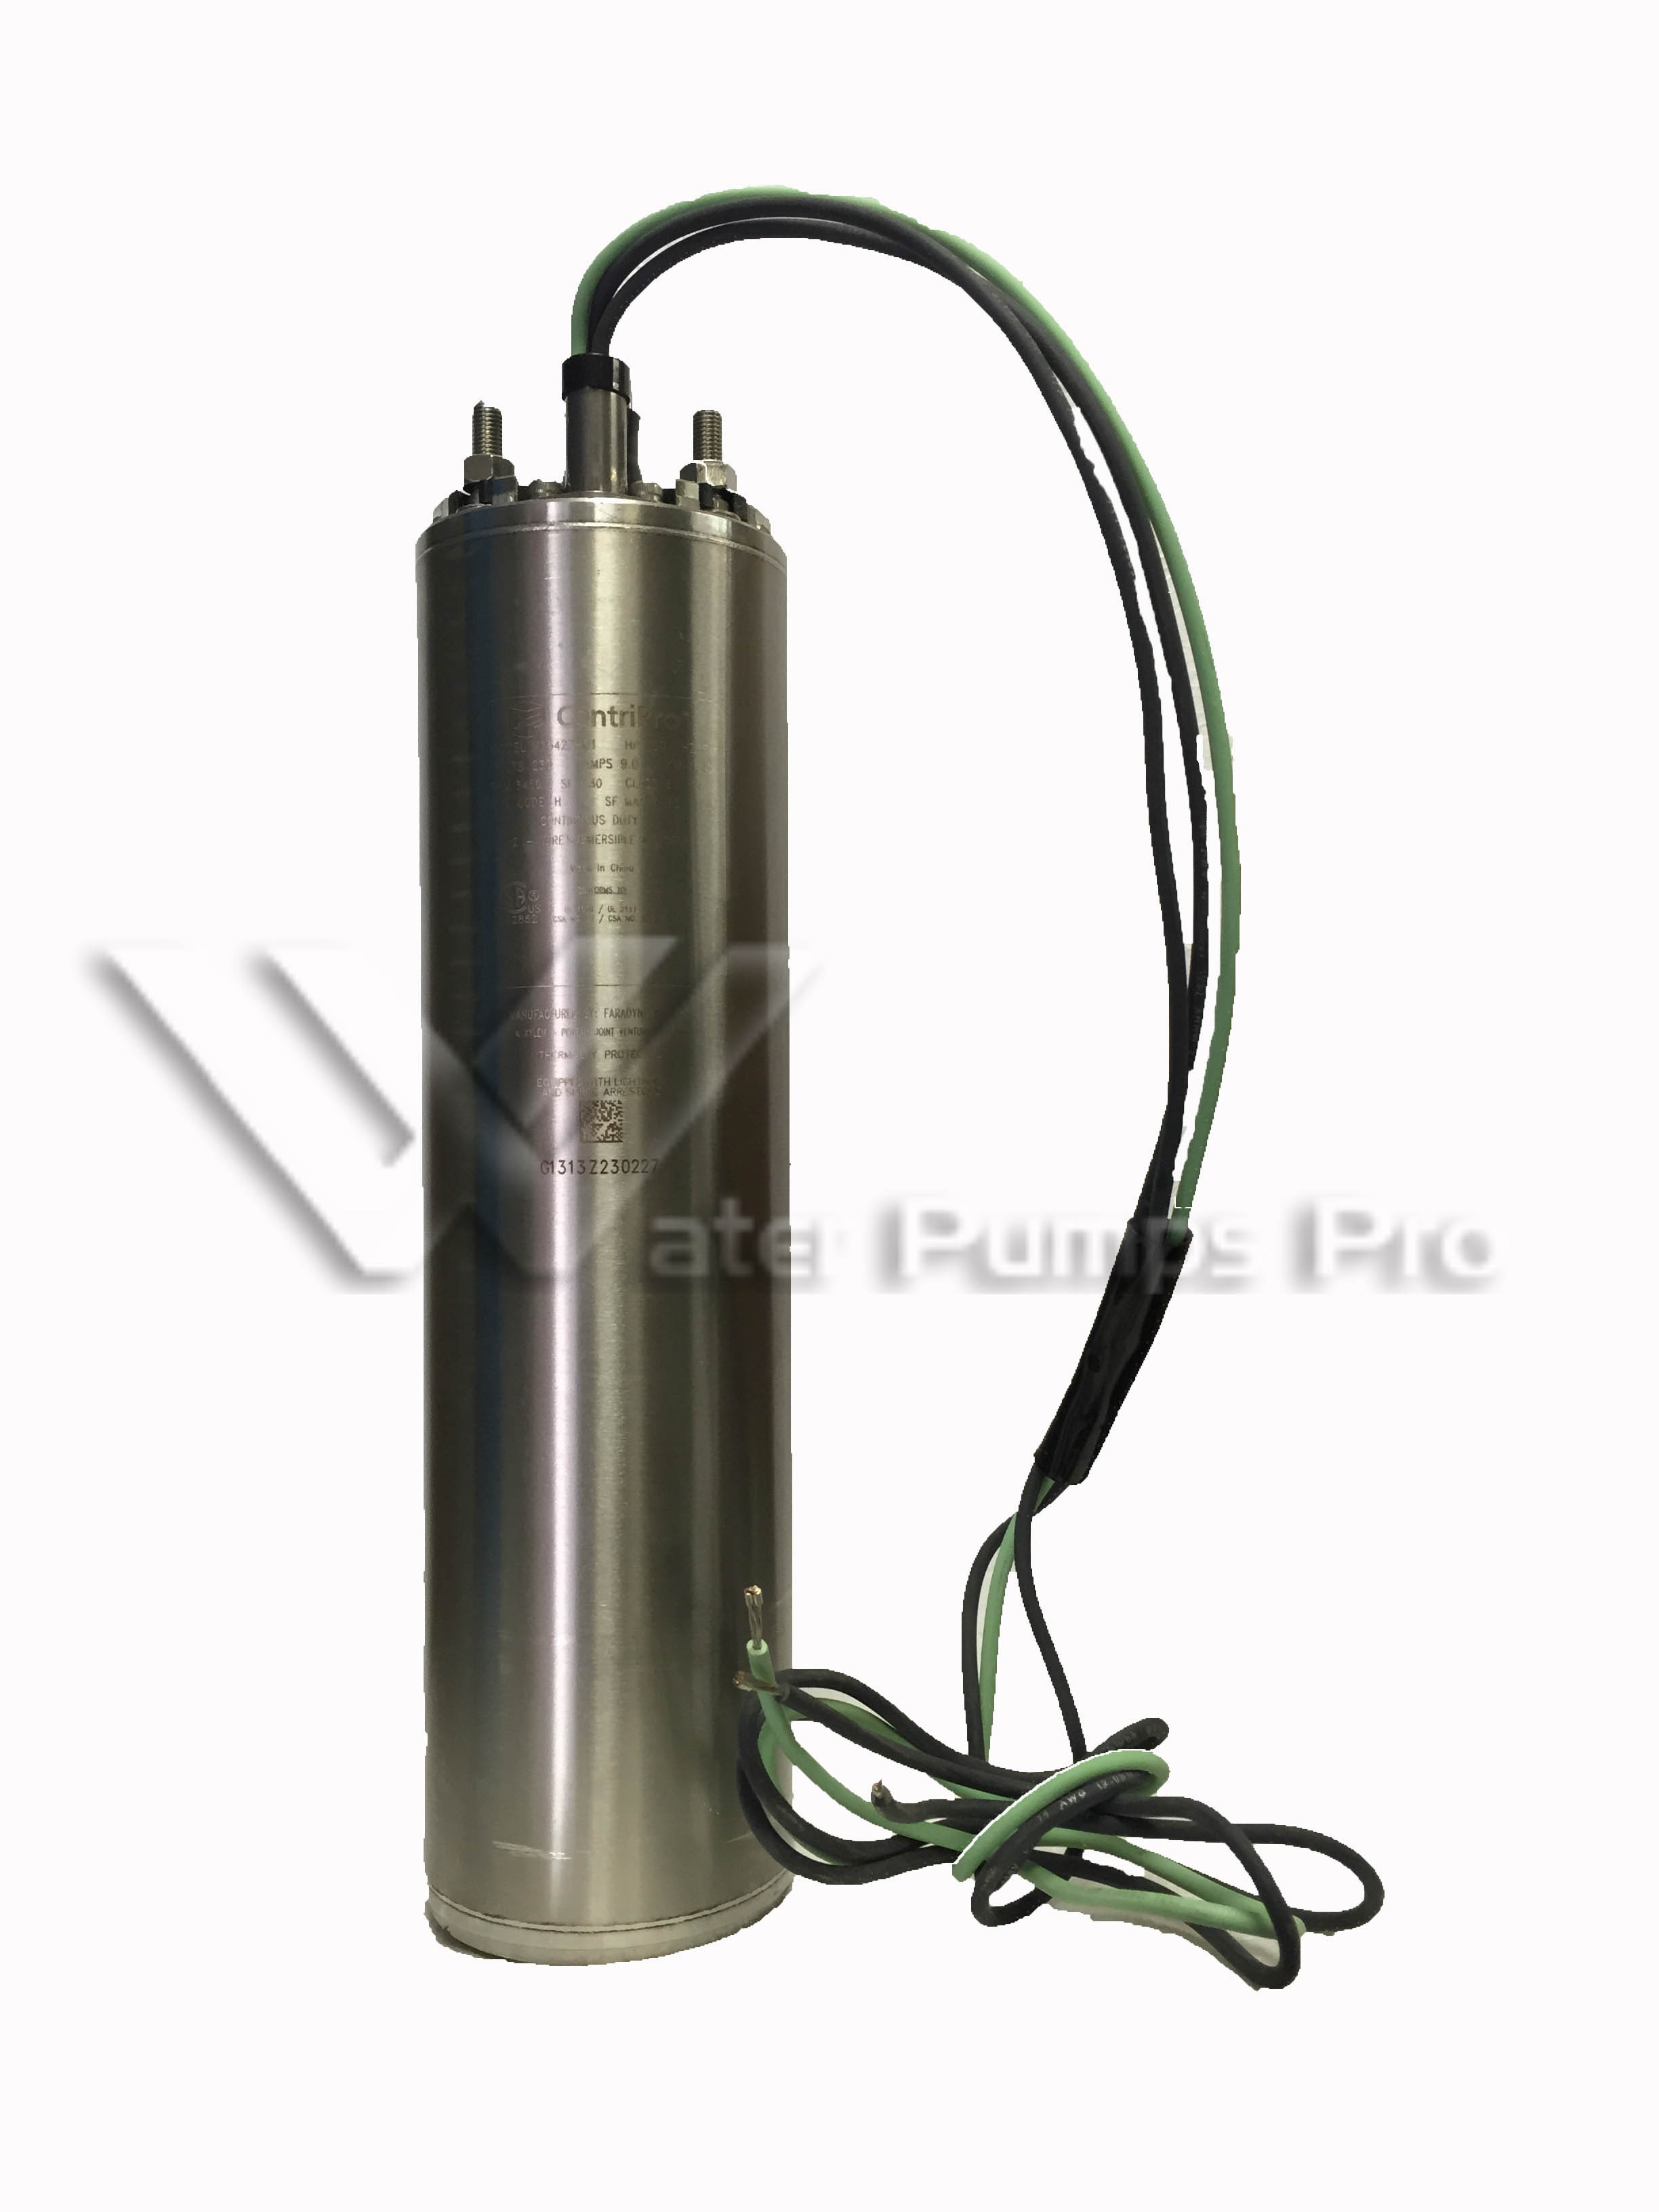 Goulds M05421 1/2HP 4" Submersible Motor 115V 1Phase 2 Wire 60Hz - Click Image to Close